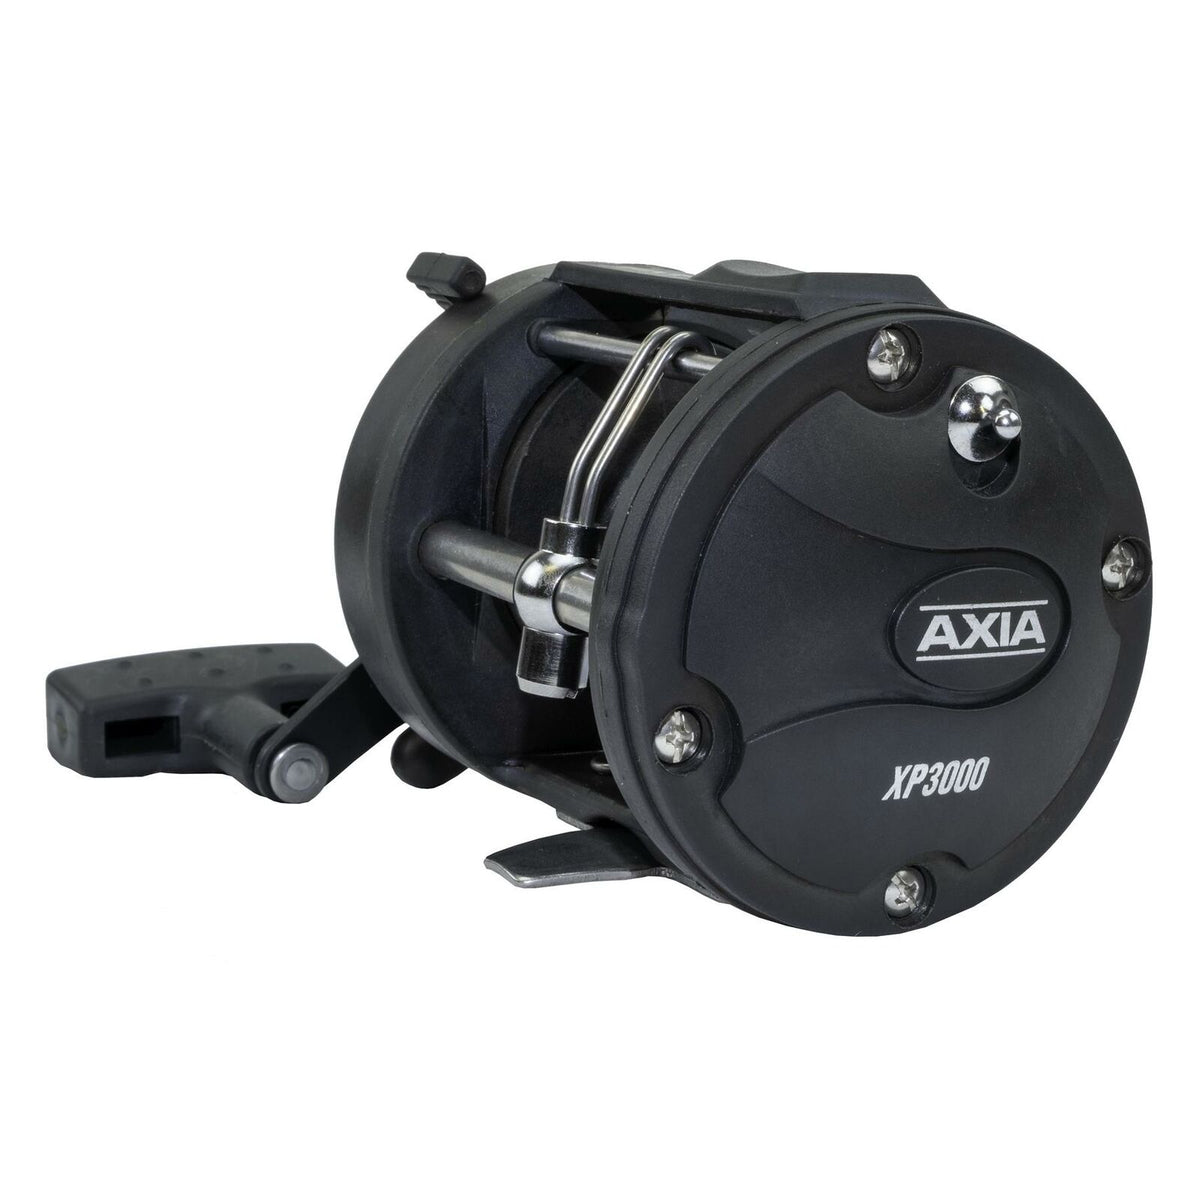 TronixPro AXIA Charter Boat XP3000 / Multiplier Reel – S and P Leisure